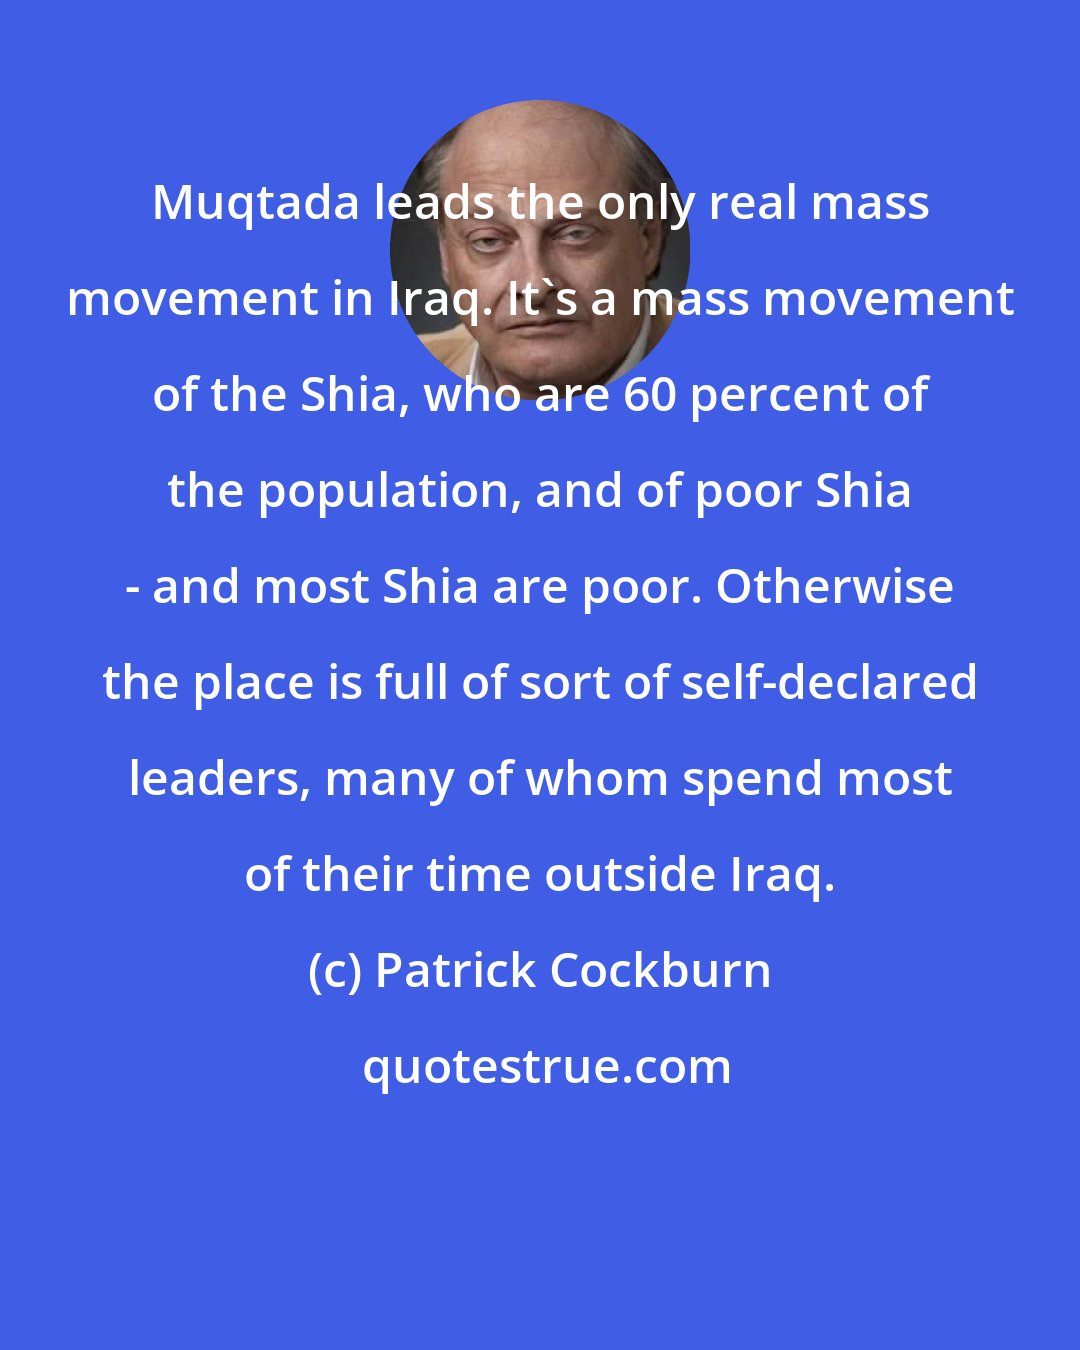 Patrick Cockburn: Muqtada leads the only real mass movement in Iraq. It's a mass movement of the Shia, who are 60 percent of the population, and of poor Shia - and most Shia are poor. Otherwise the place is full of sort of self-declared leaders, many of whom spend most of their time outside Iraq.